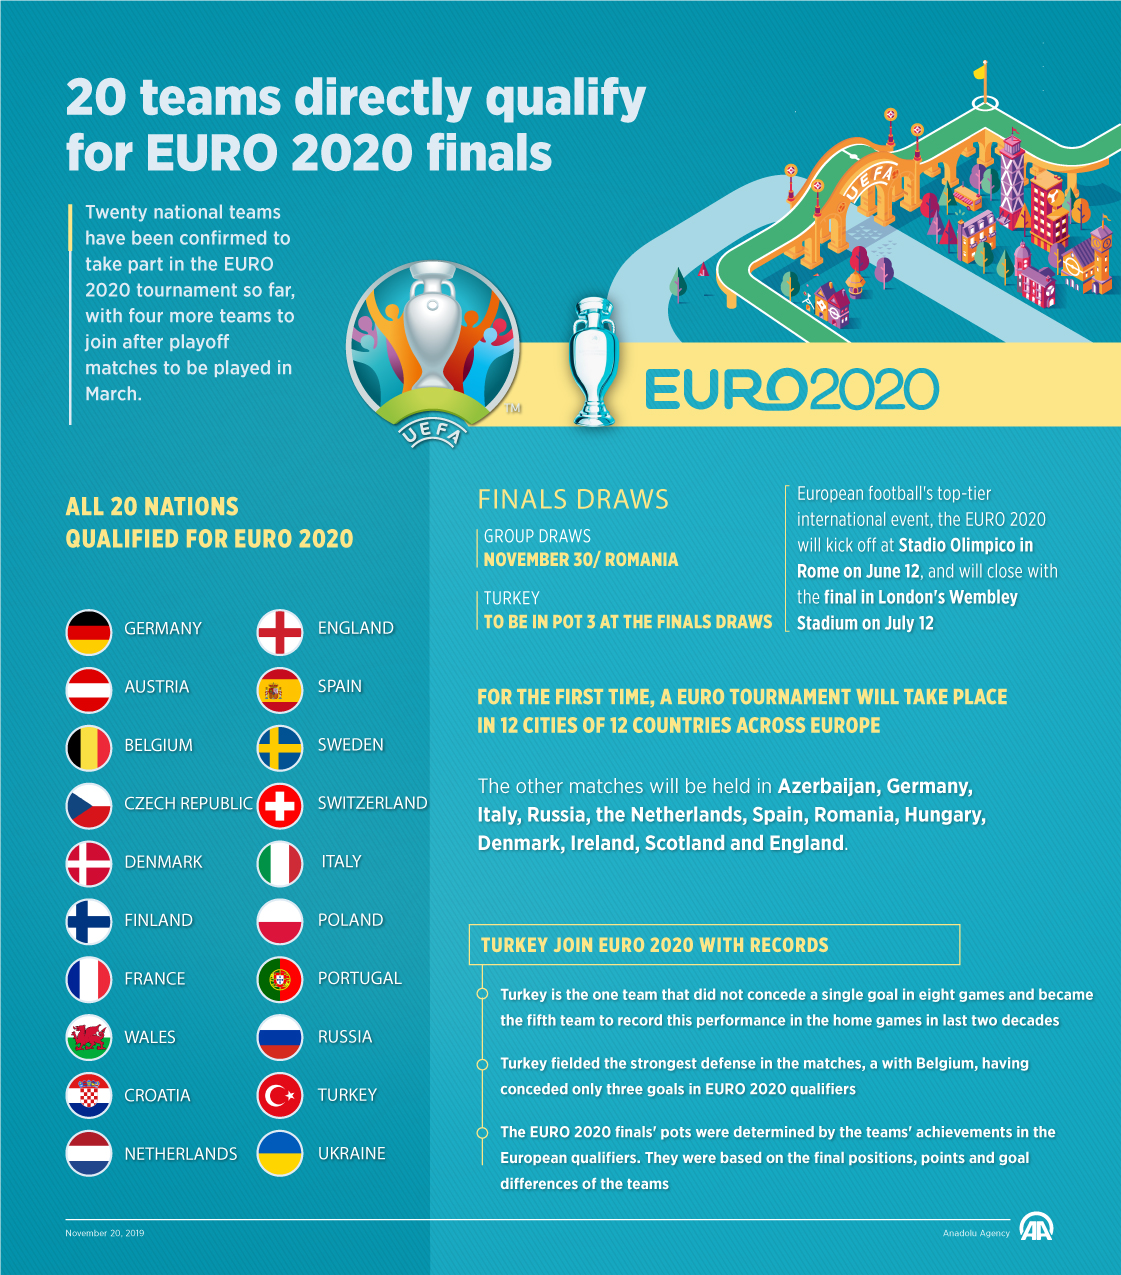 20 teams directly qualify for EURO 2020 finals